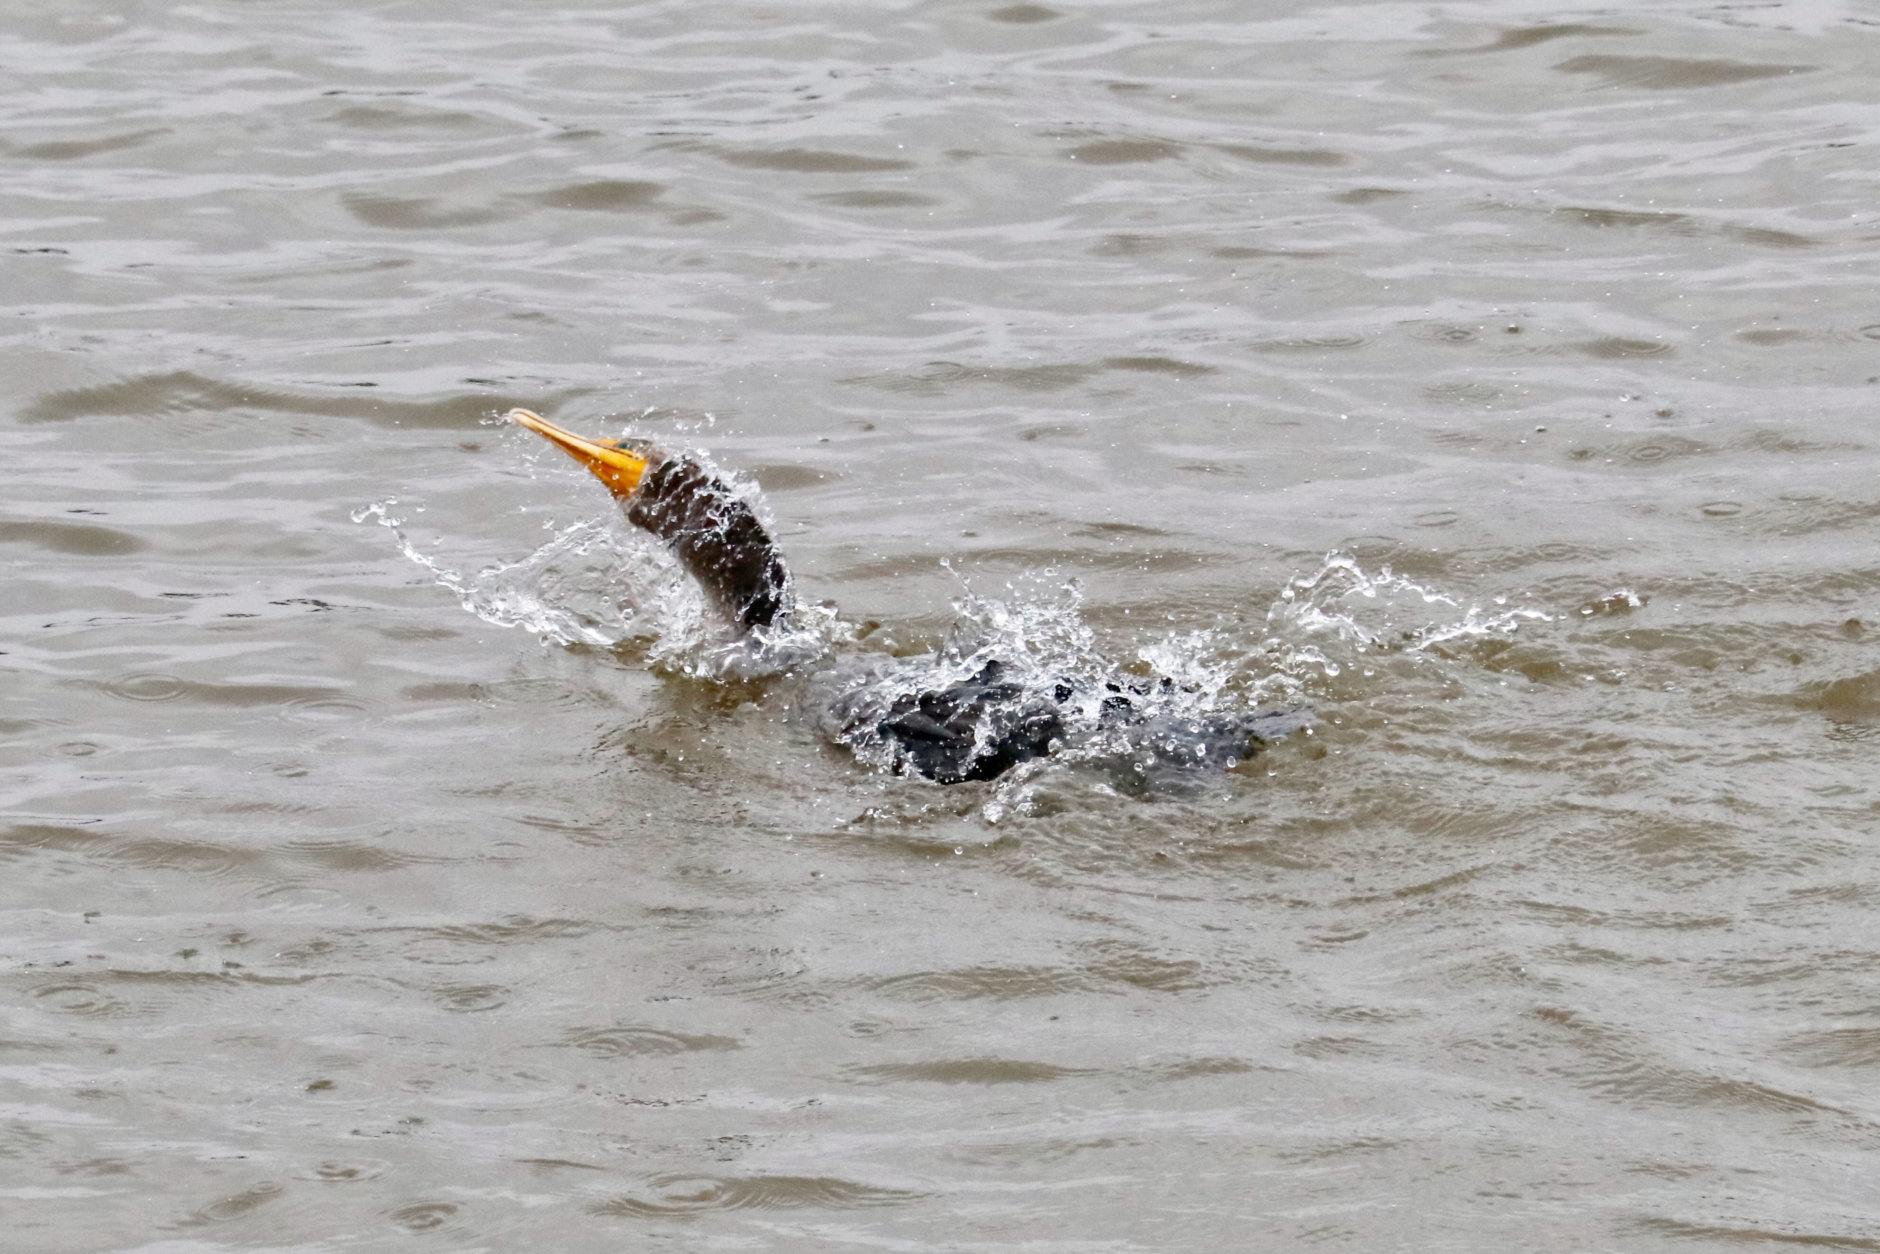 A cormorant isn’t put off by the tidal flooding near Hains Point. It dives in for a bathing session. (WTOP/Kate Ryan)